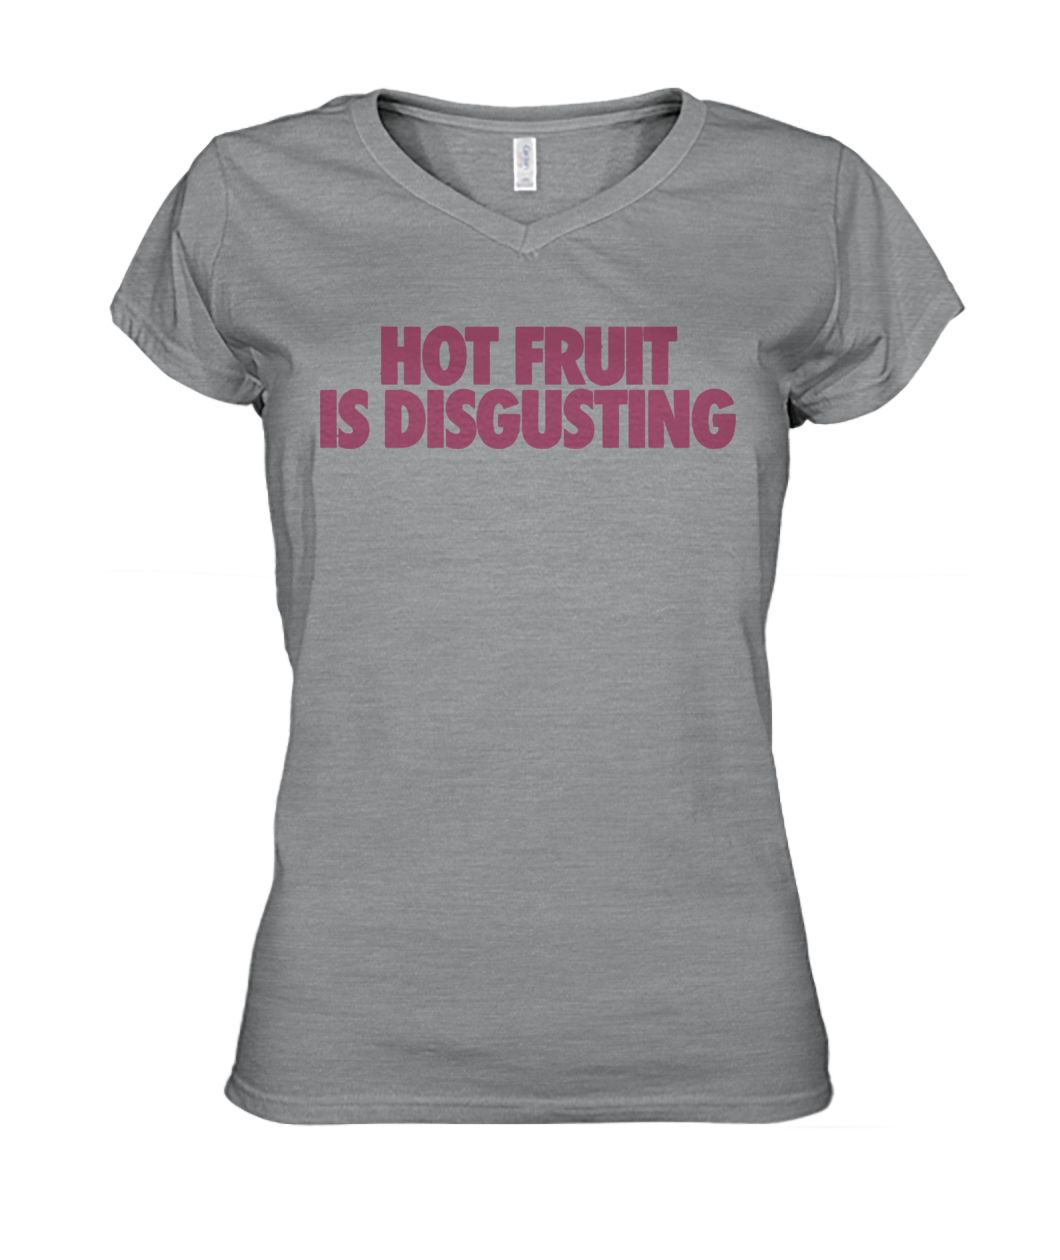 Hot fruit is disgusting women's v-neck